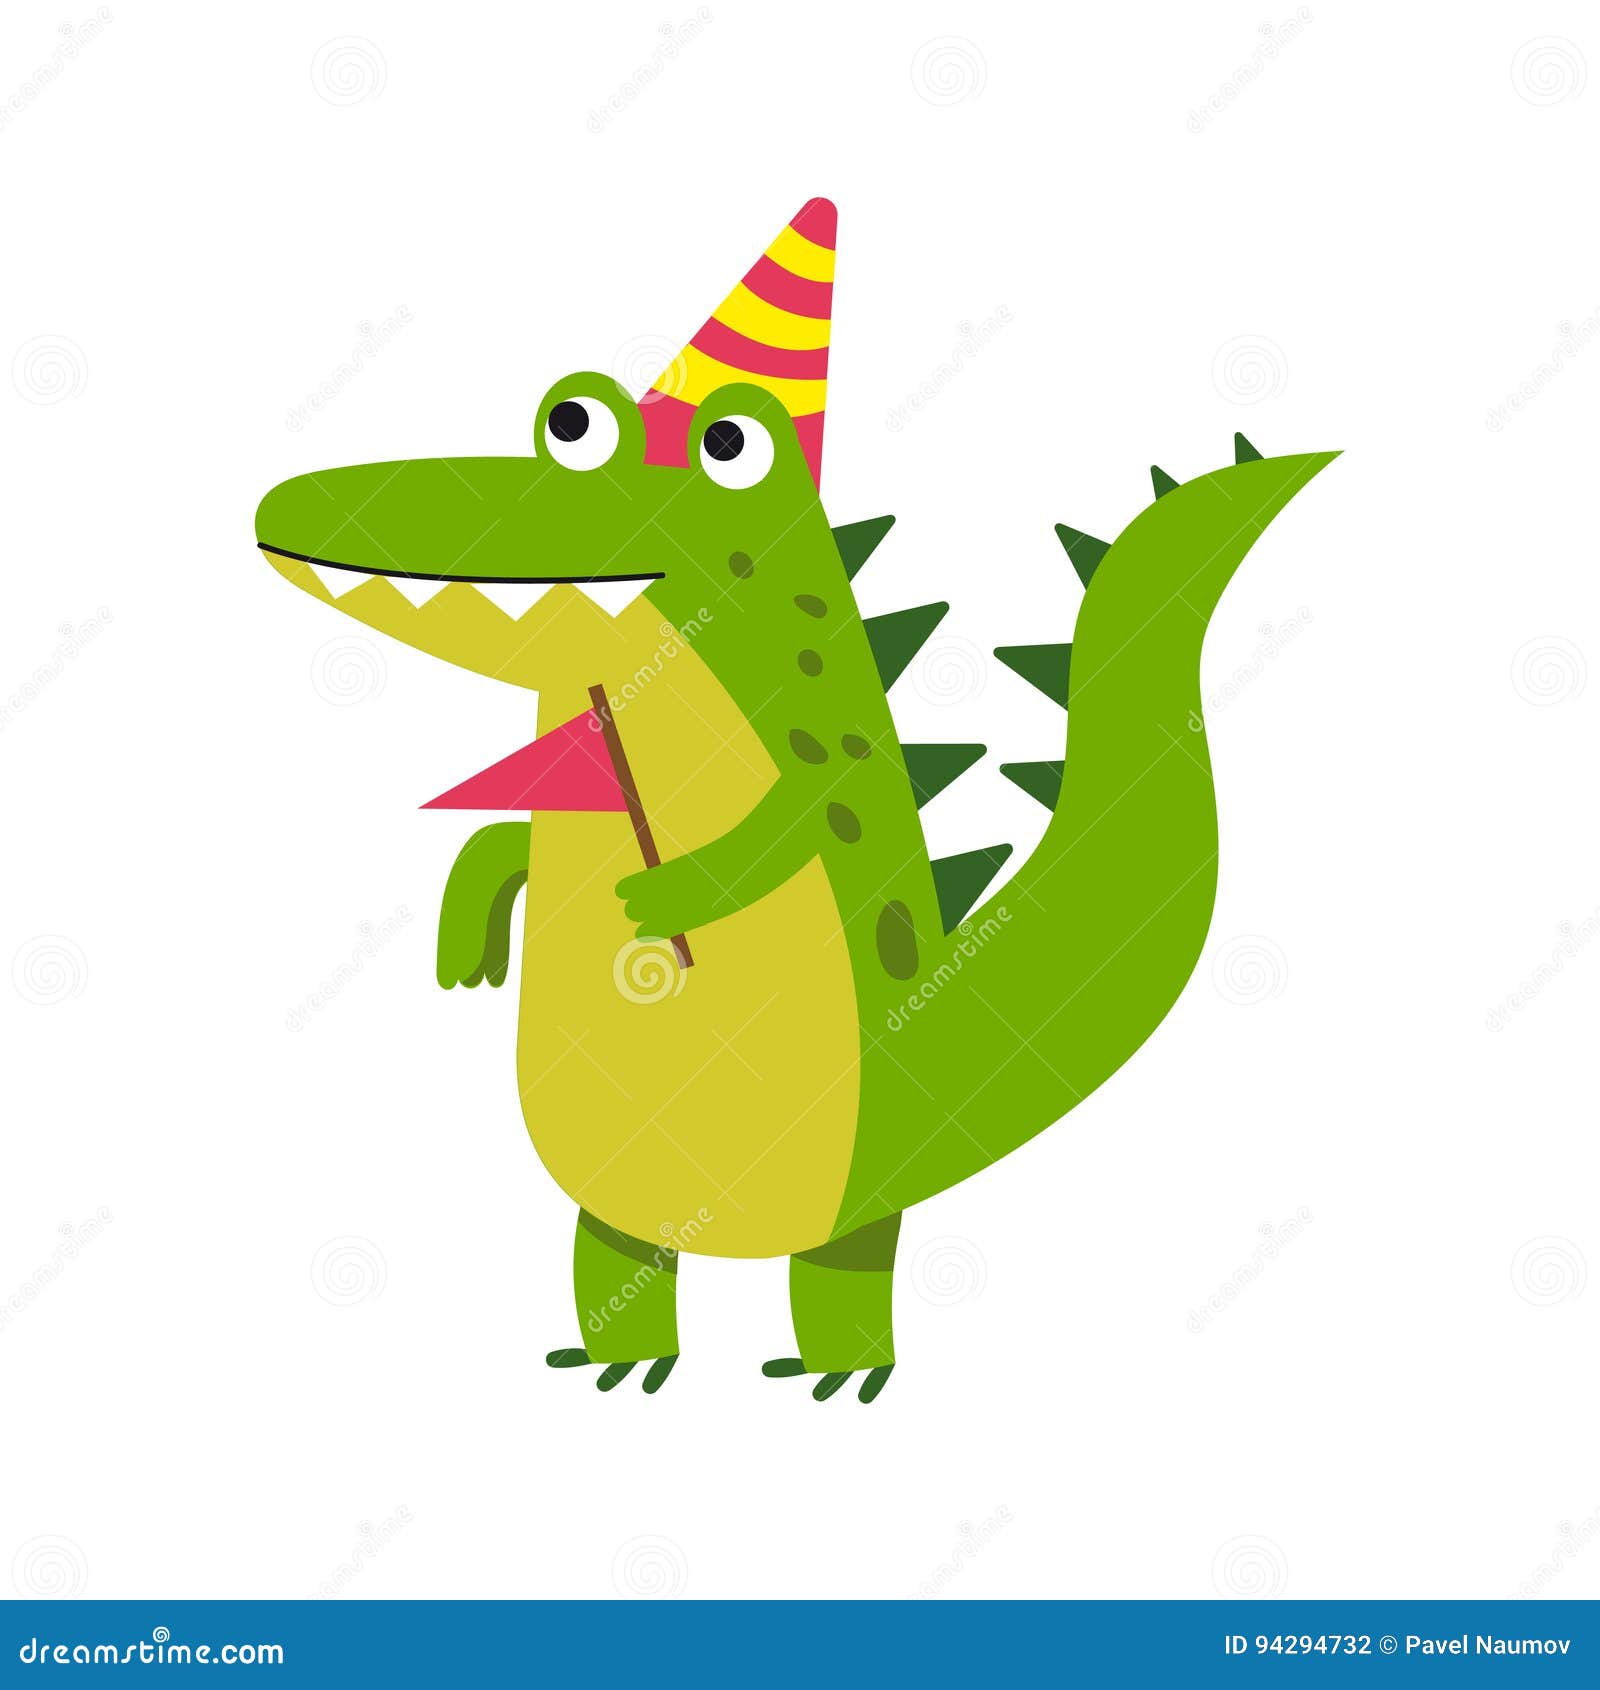 Cute Cartoon Crocodile Character Wearing Party Hat Standing And Holding Pennant Vector